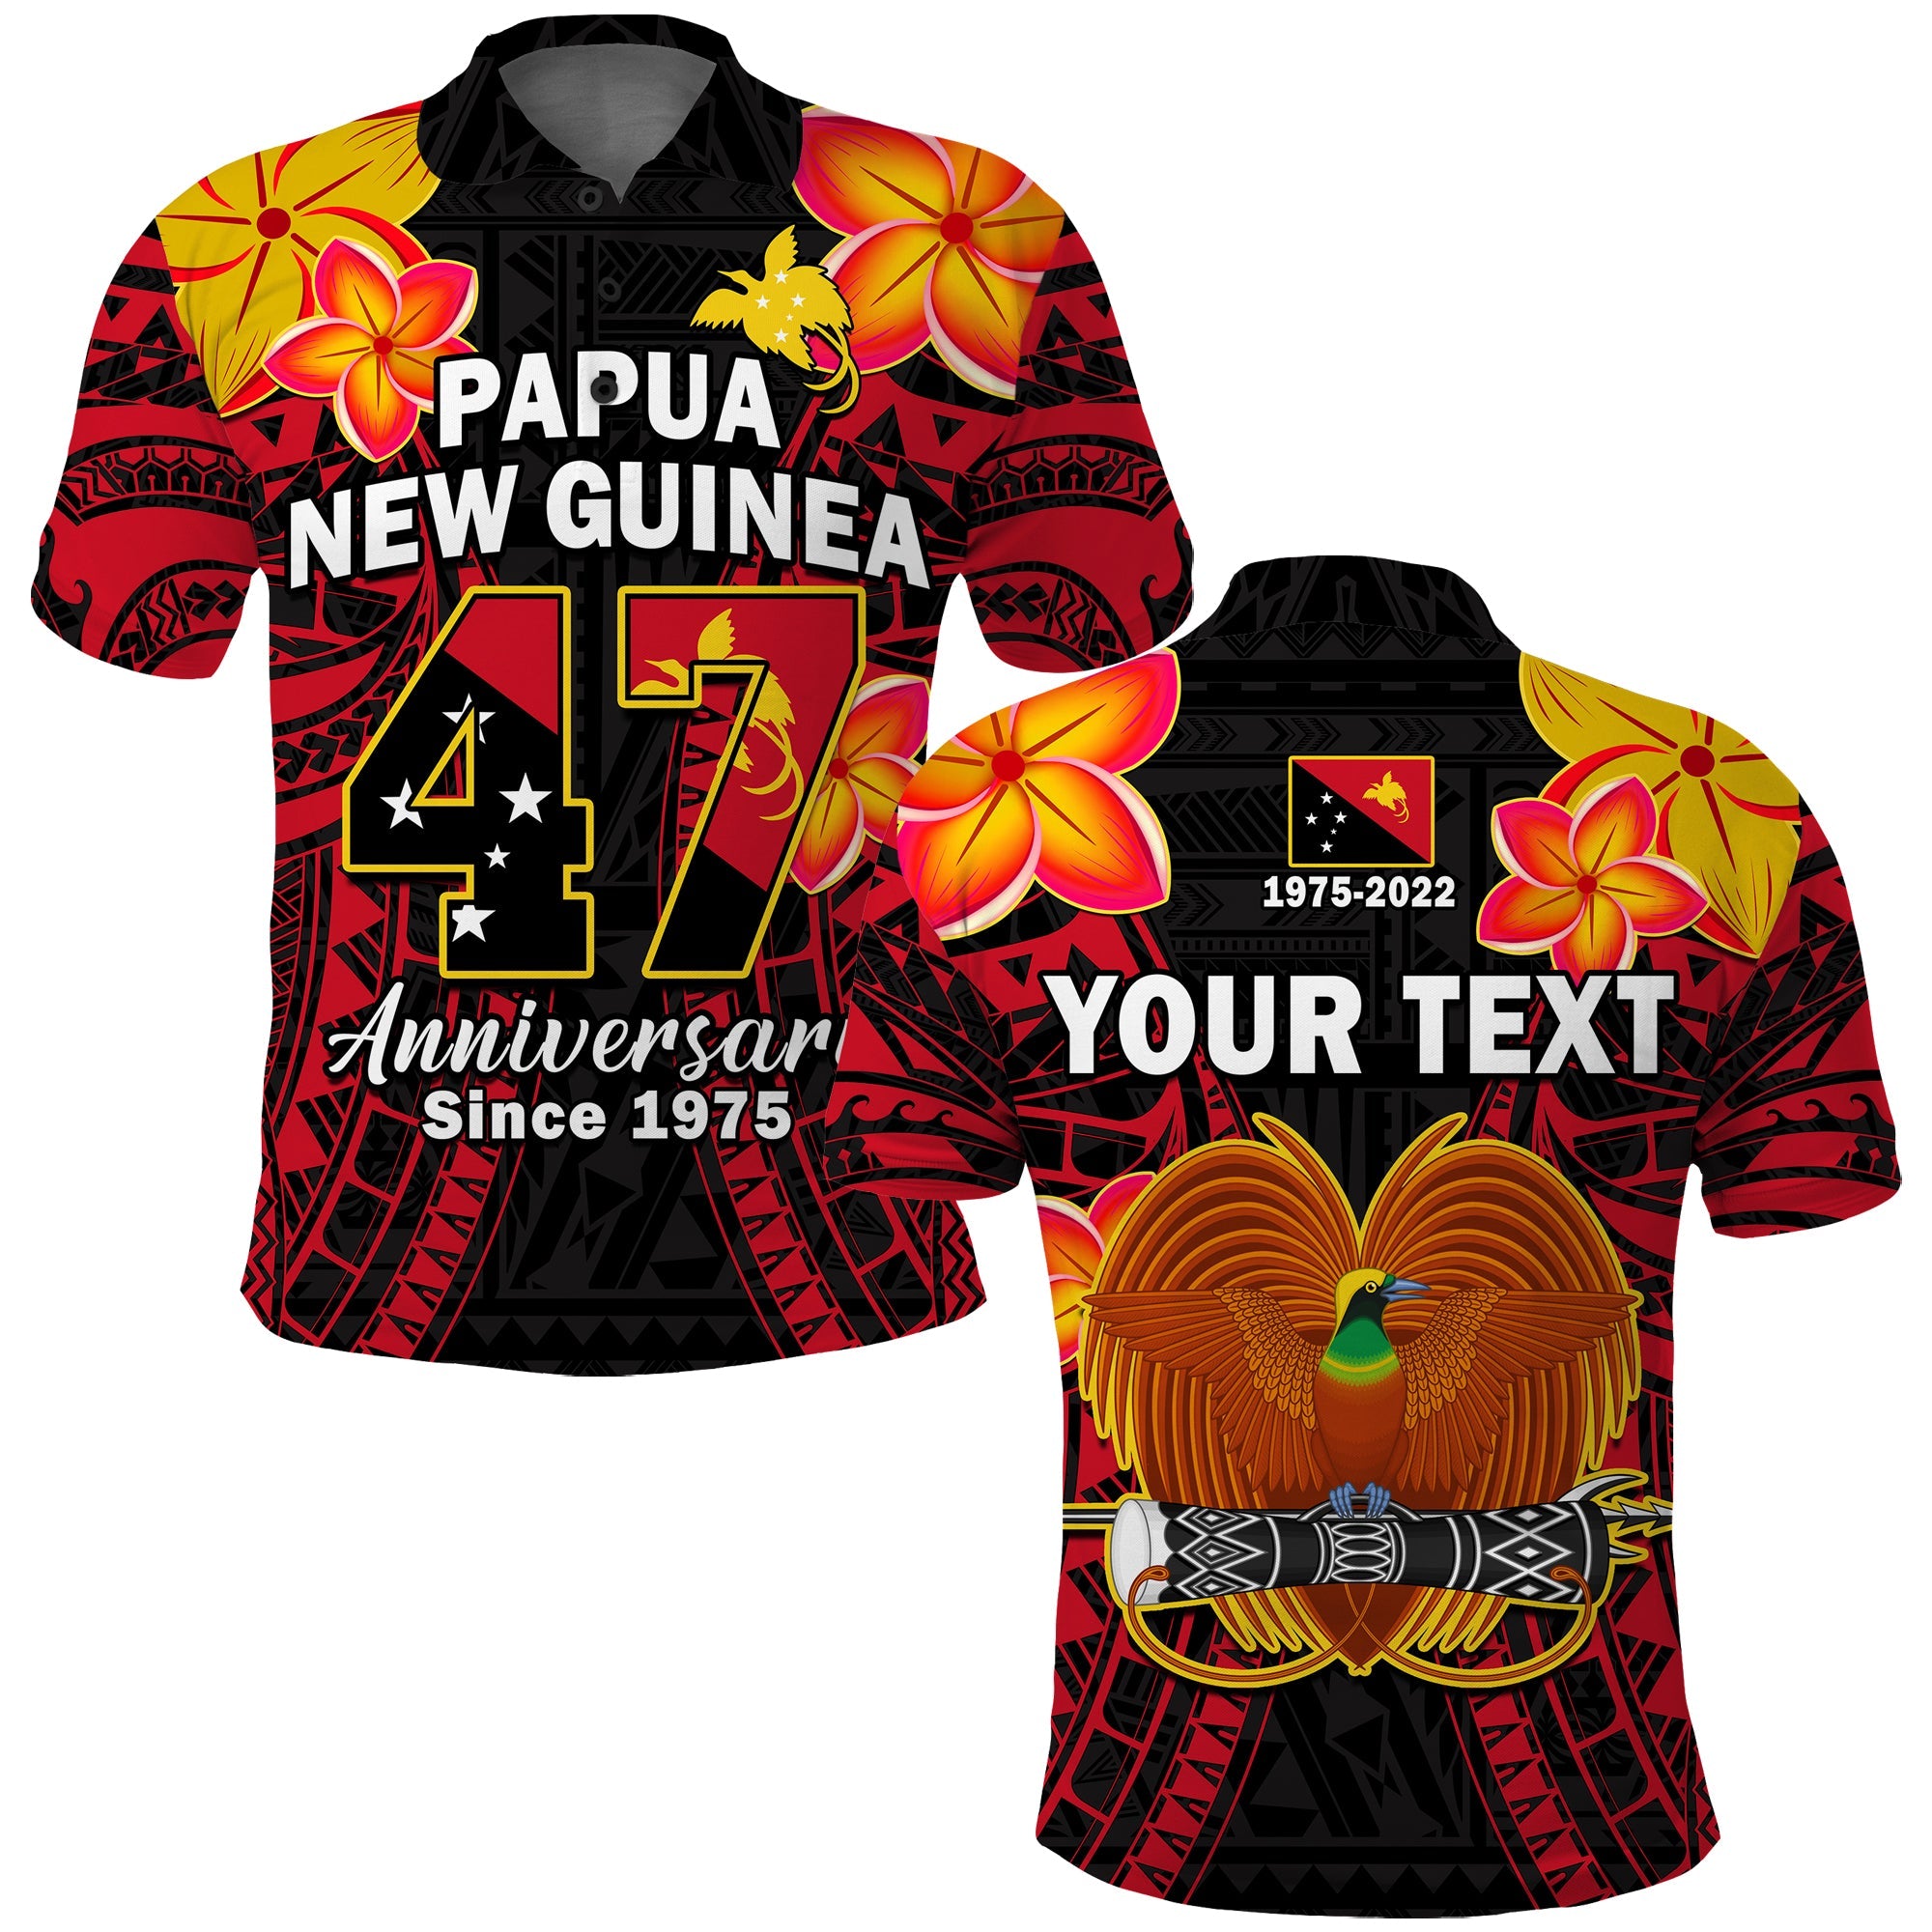 Custom Papua New Guinea Polo Shirt PNG 47 Years Independence Anniversary LT14 Adult Red - Polynesian Pride